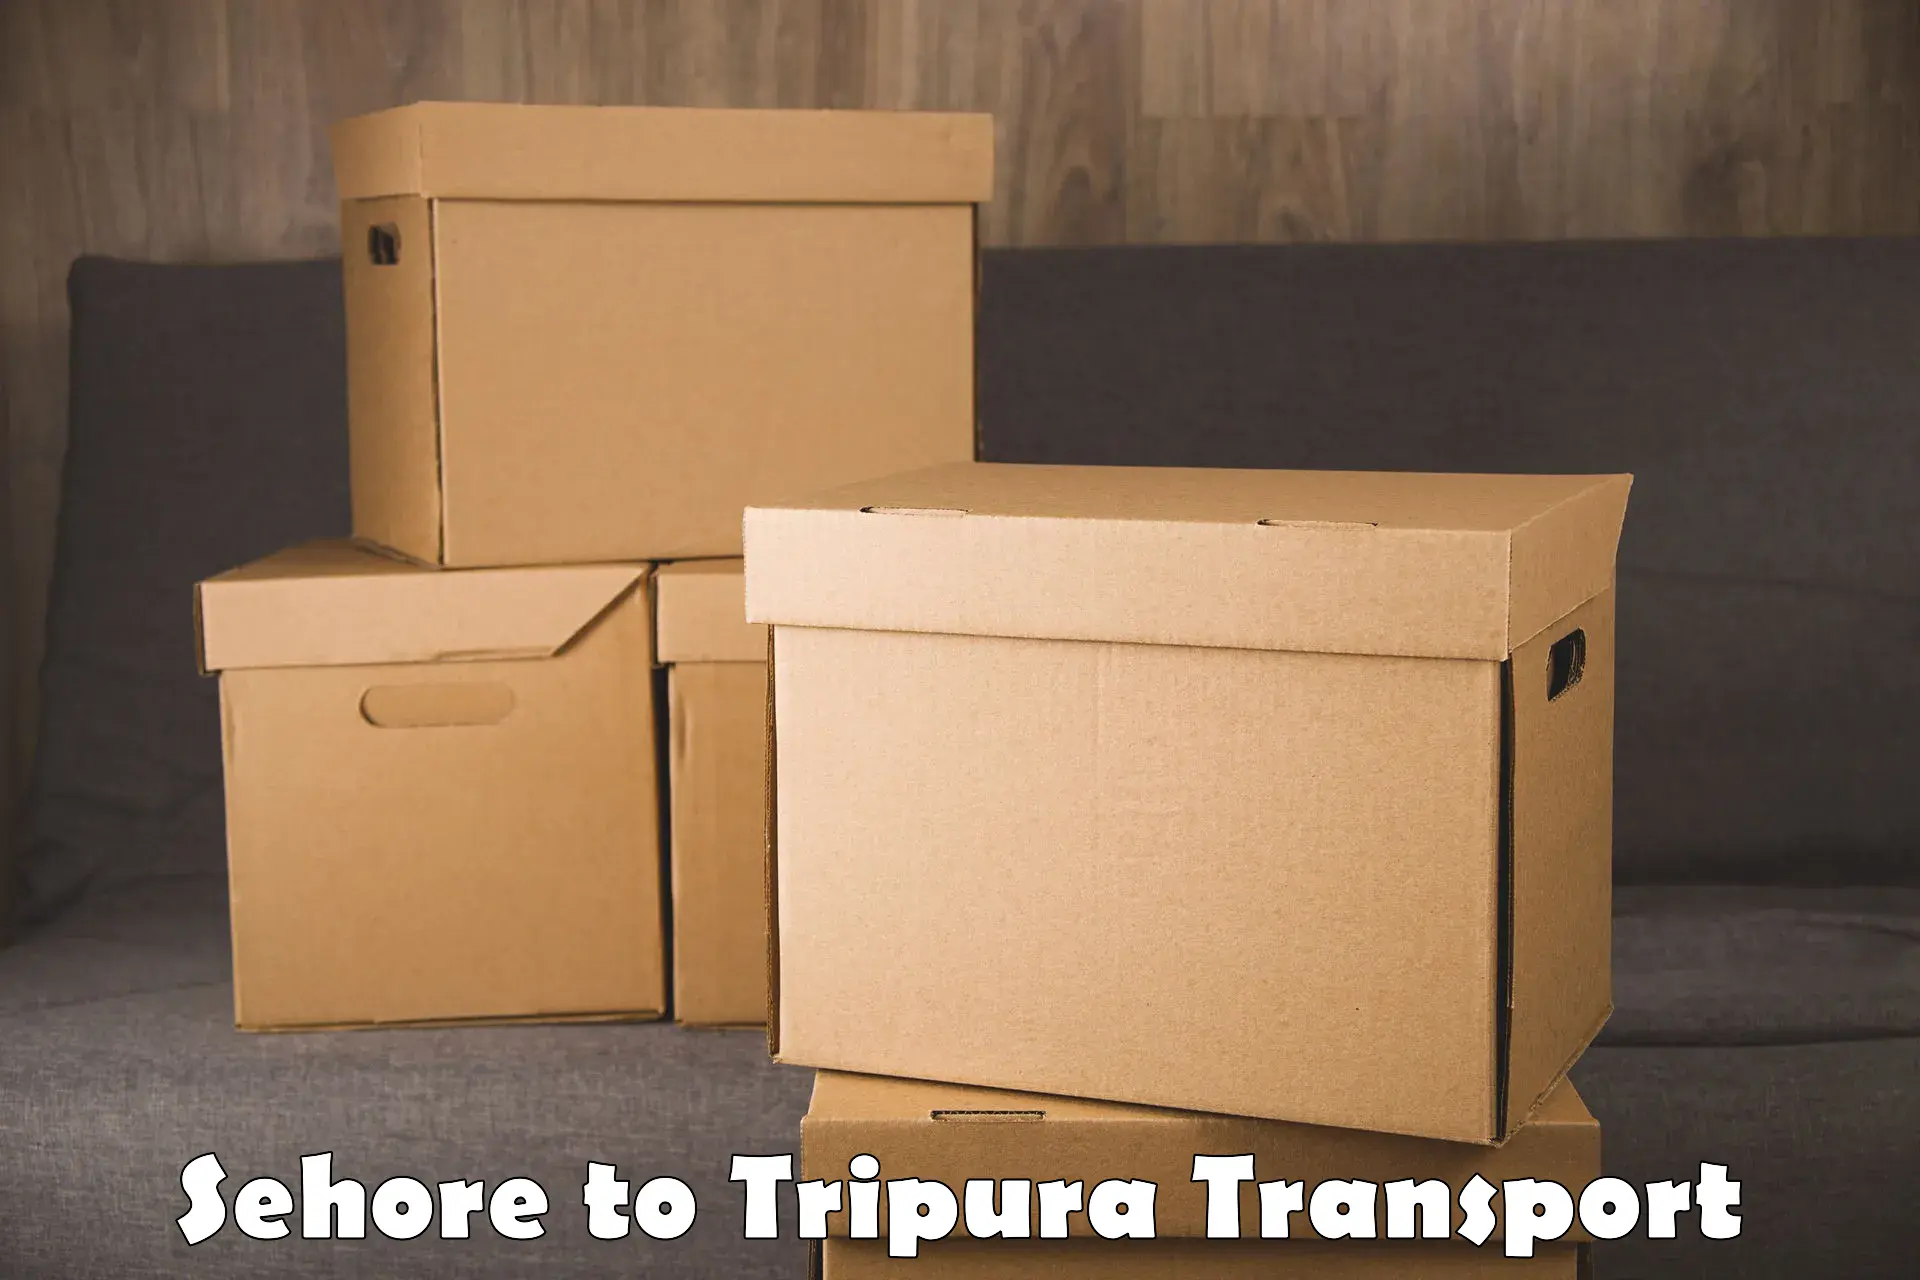 Transport bike from one state to another Sehore to Udaipur Tripura